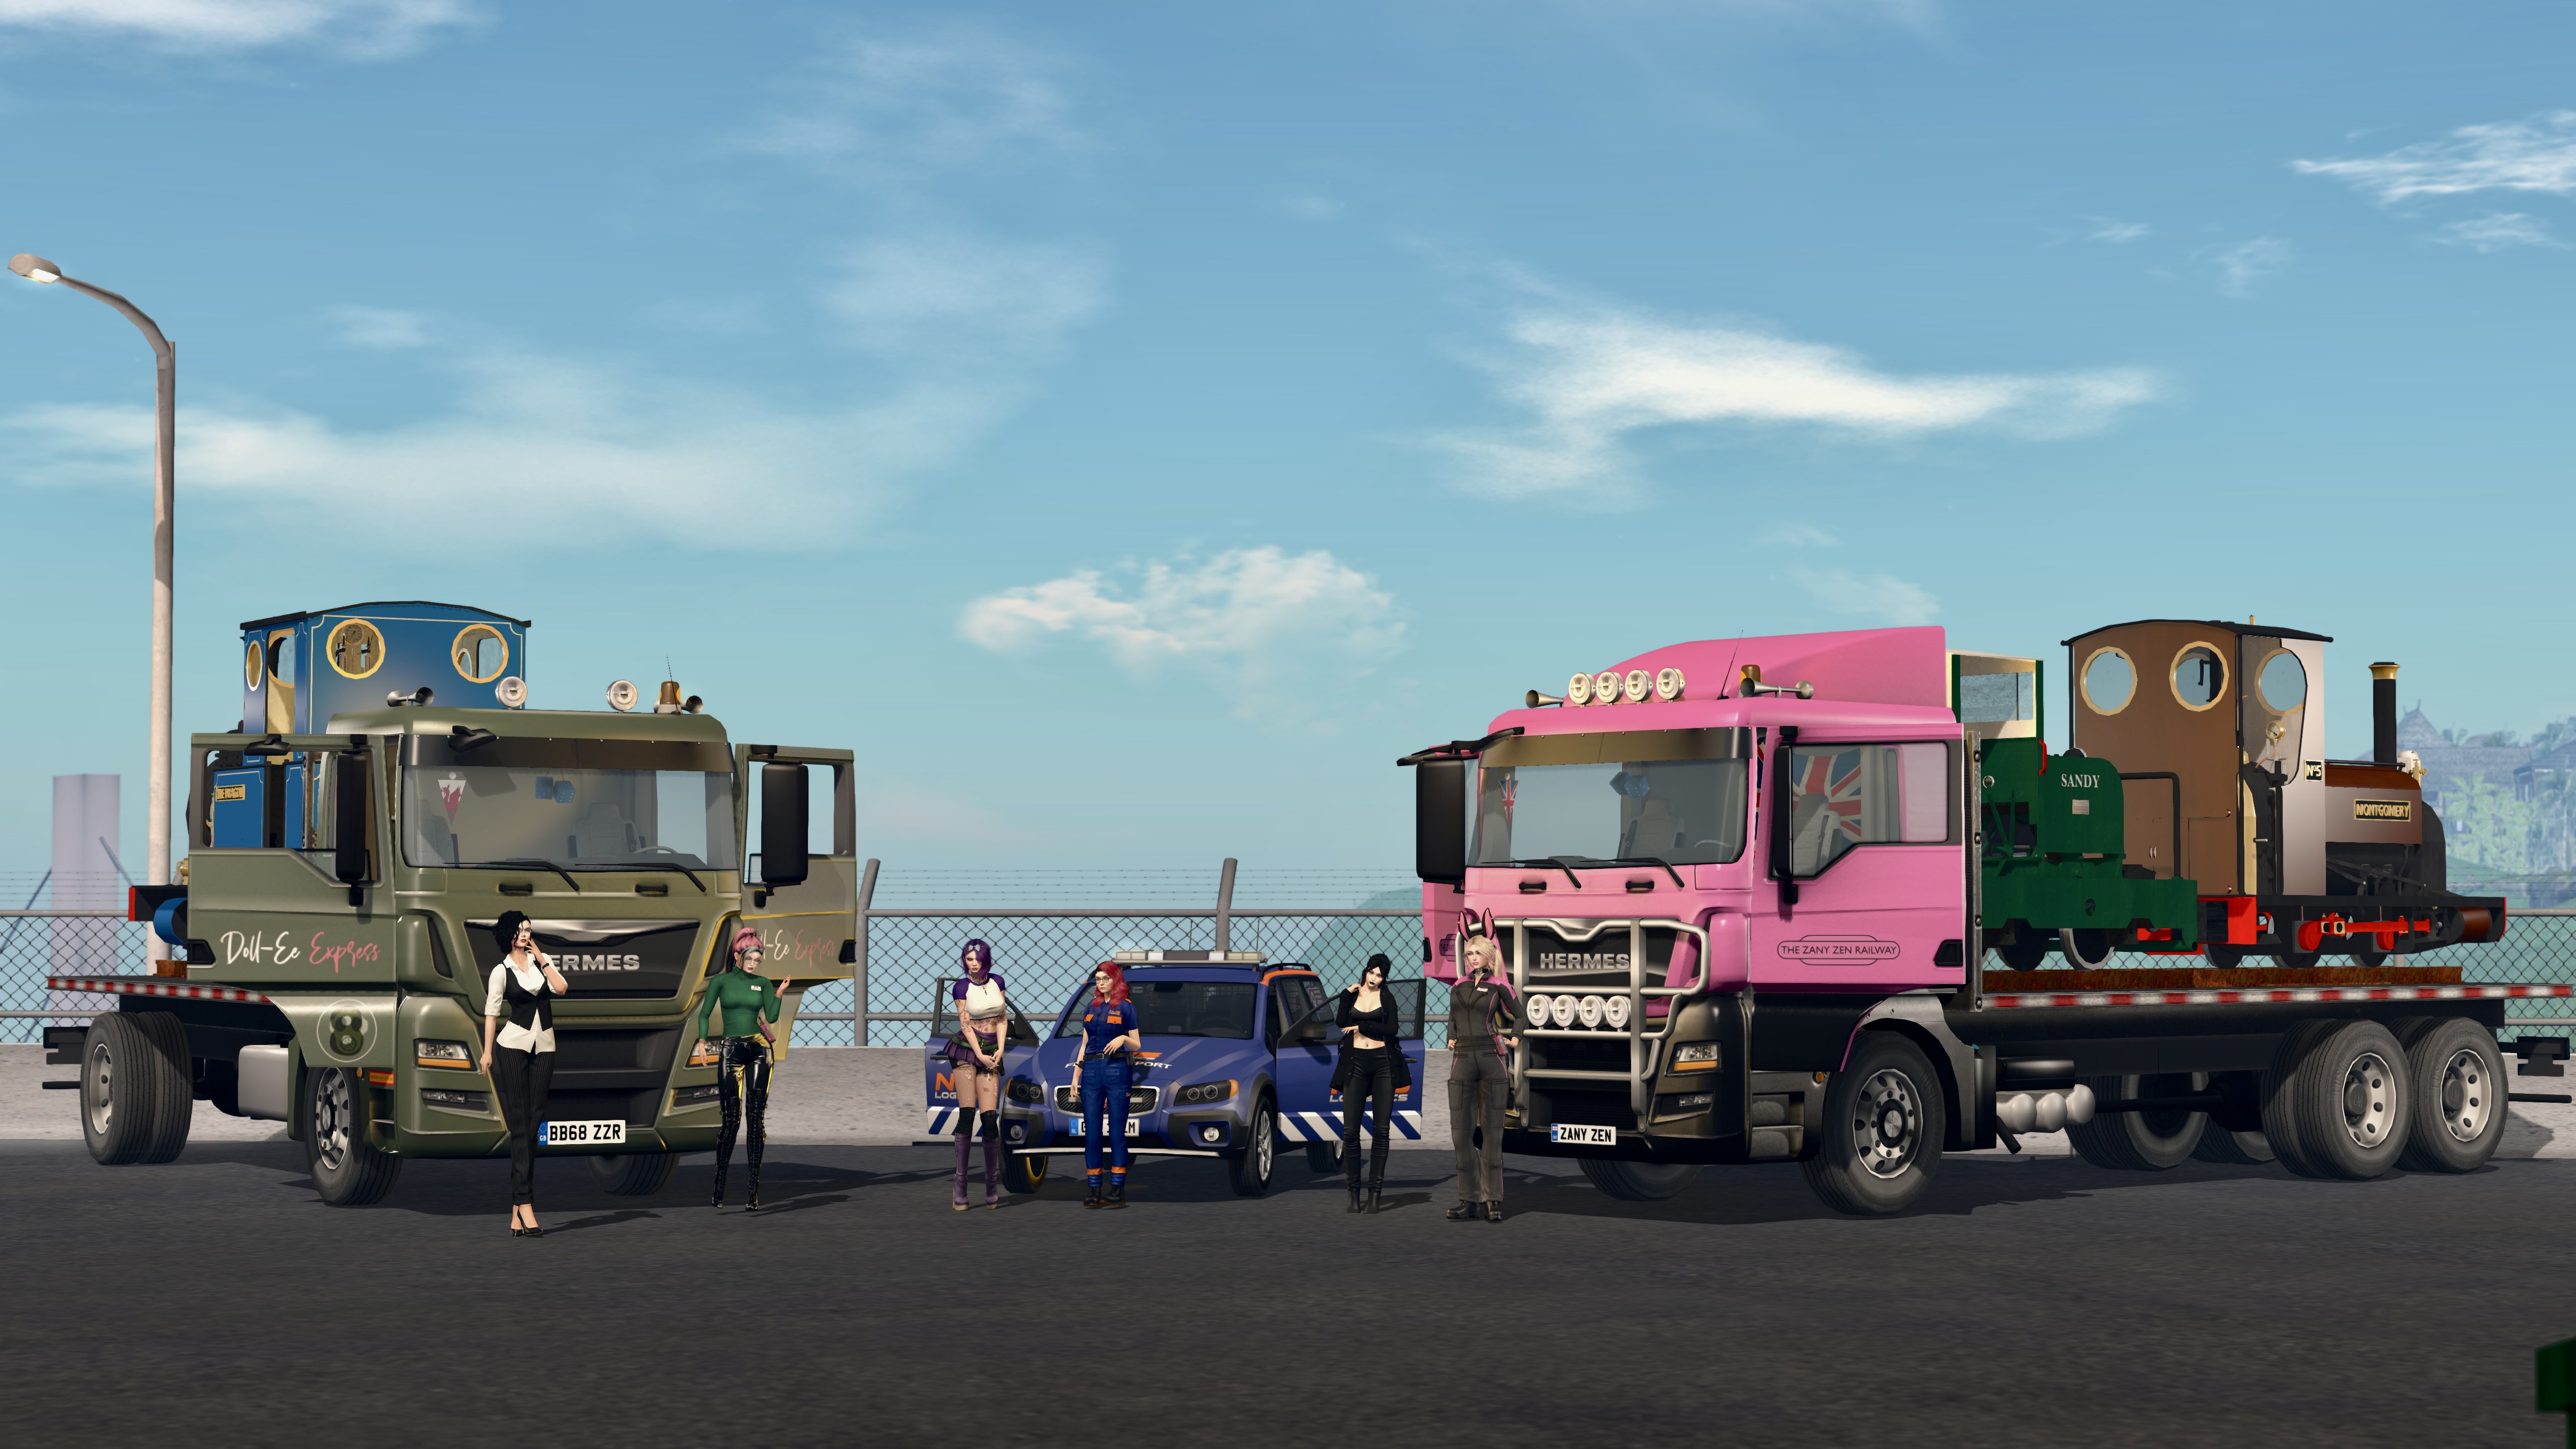 The Zany Zen Railway Loco Convoy At the Airport ready to load the locos on a cargo plane destined for SL20B, Featuring Zen Swords-Galway, Lyatsu, Shay Finchy, Gemma Chelmsford, Eesoov Elan and Alexis Sinclair.